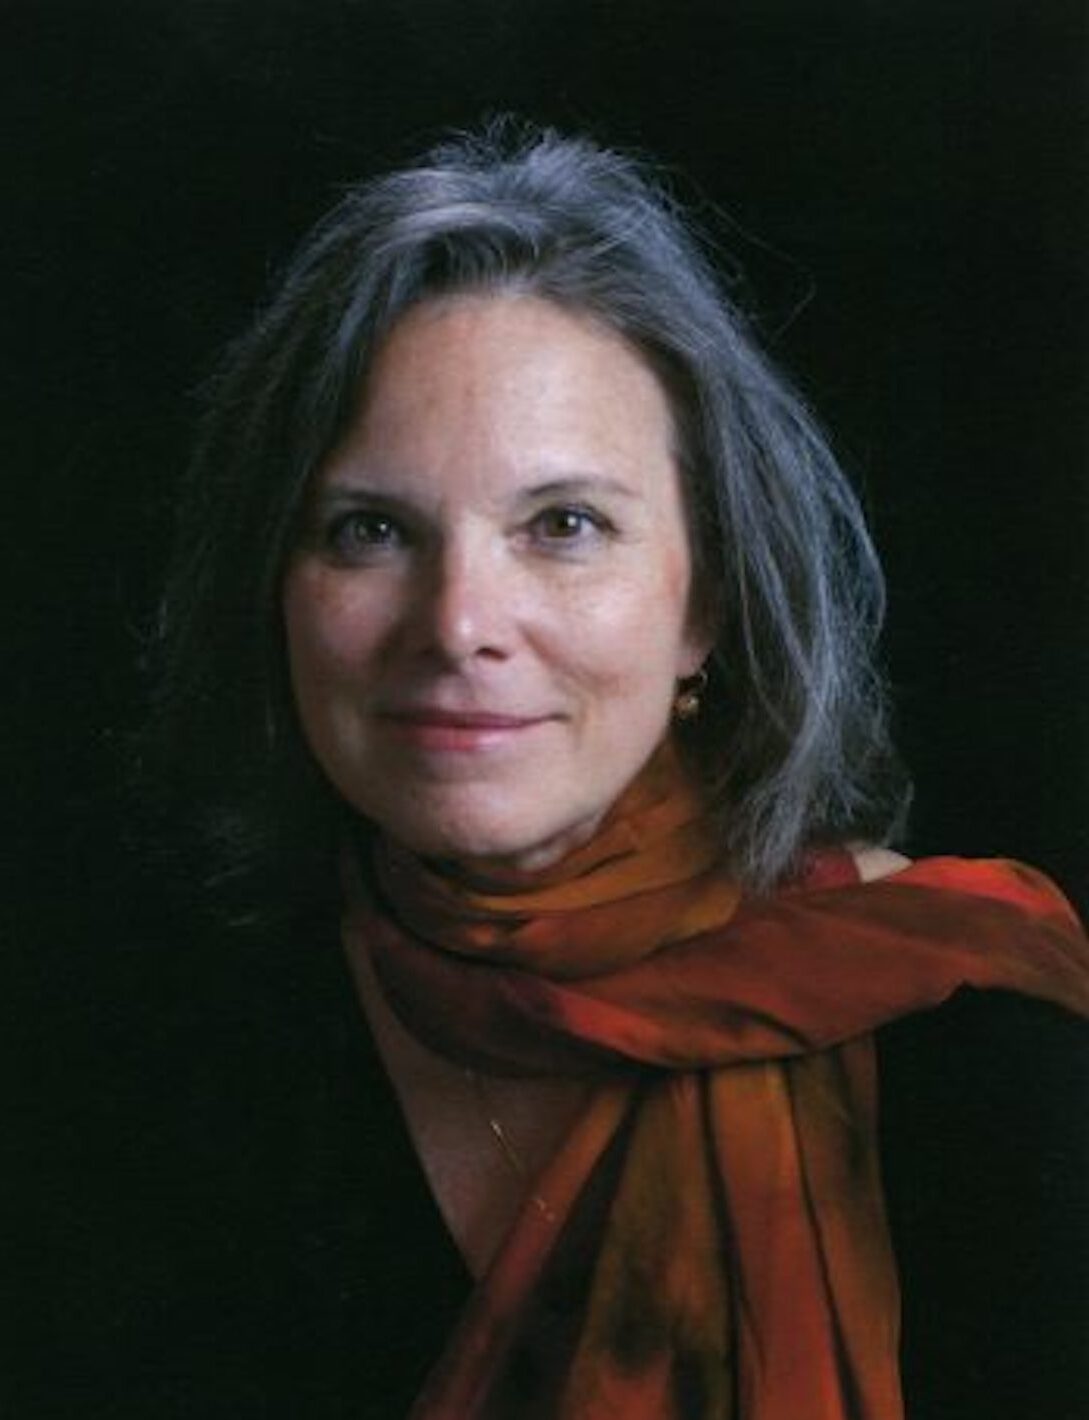 Photograph of Carolyn Forché by Donald J. Usner